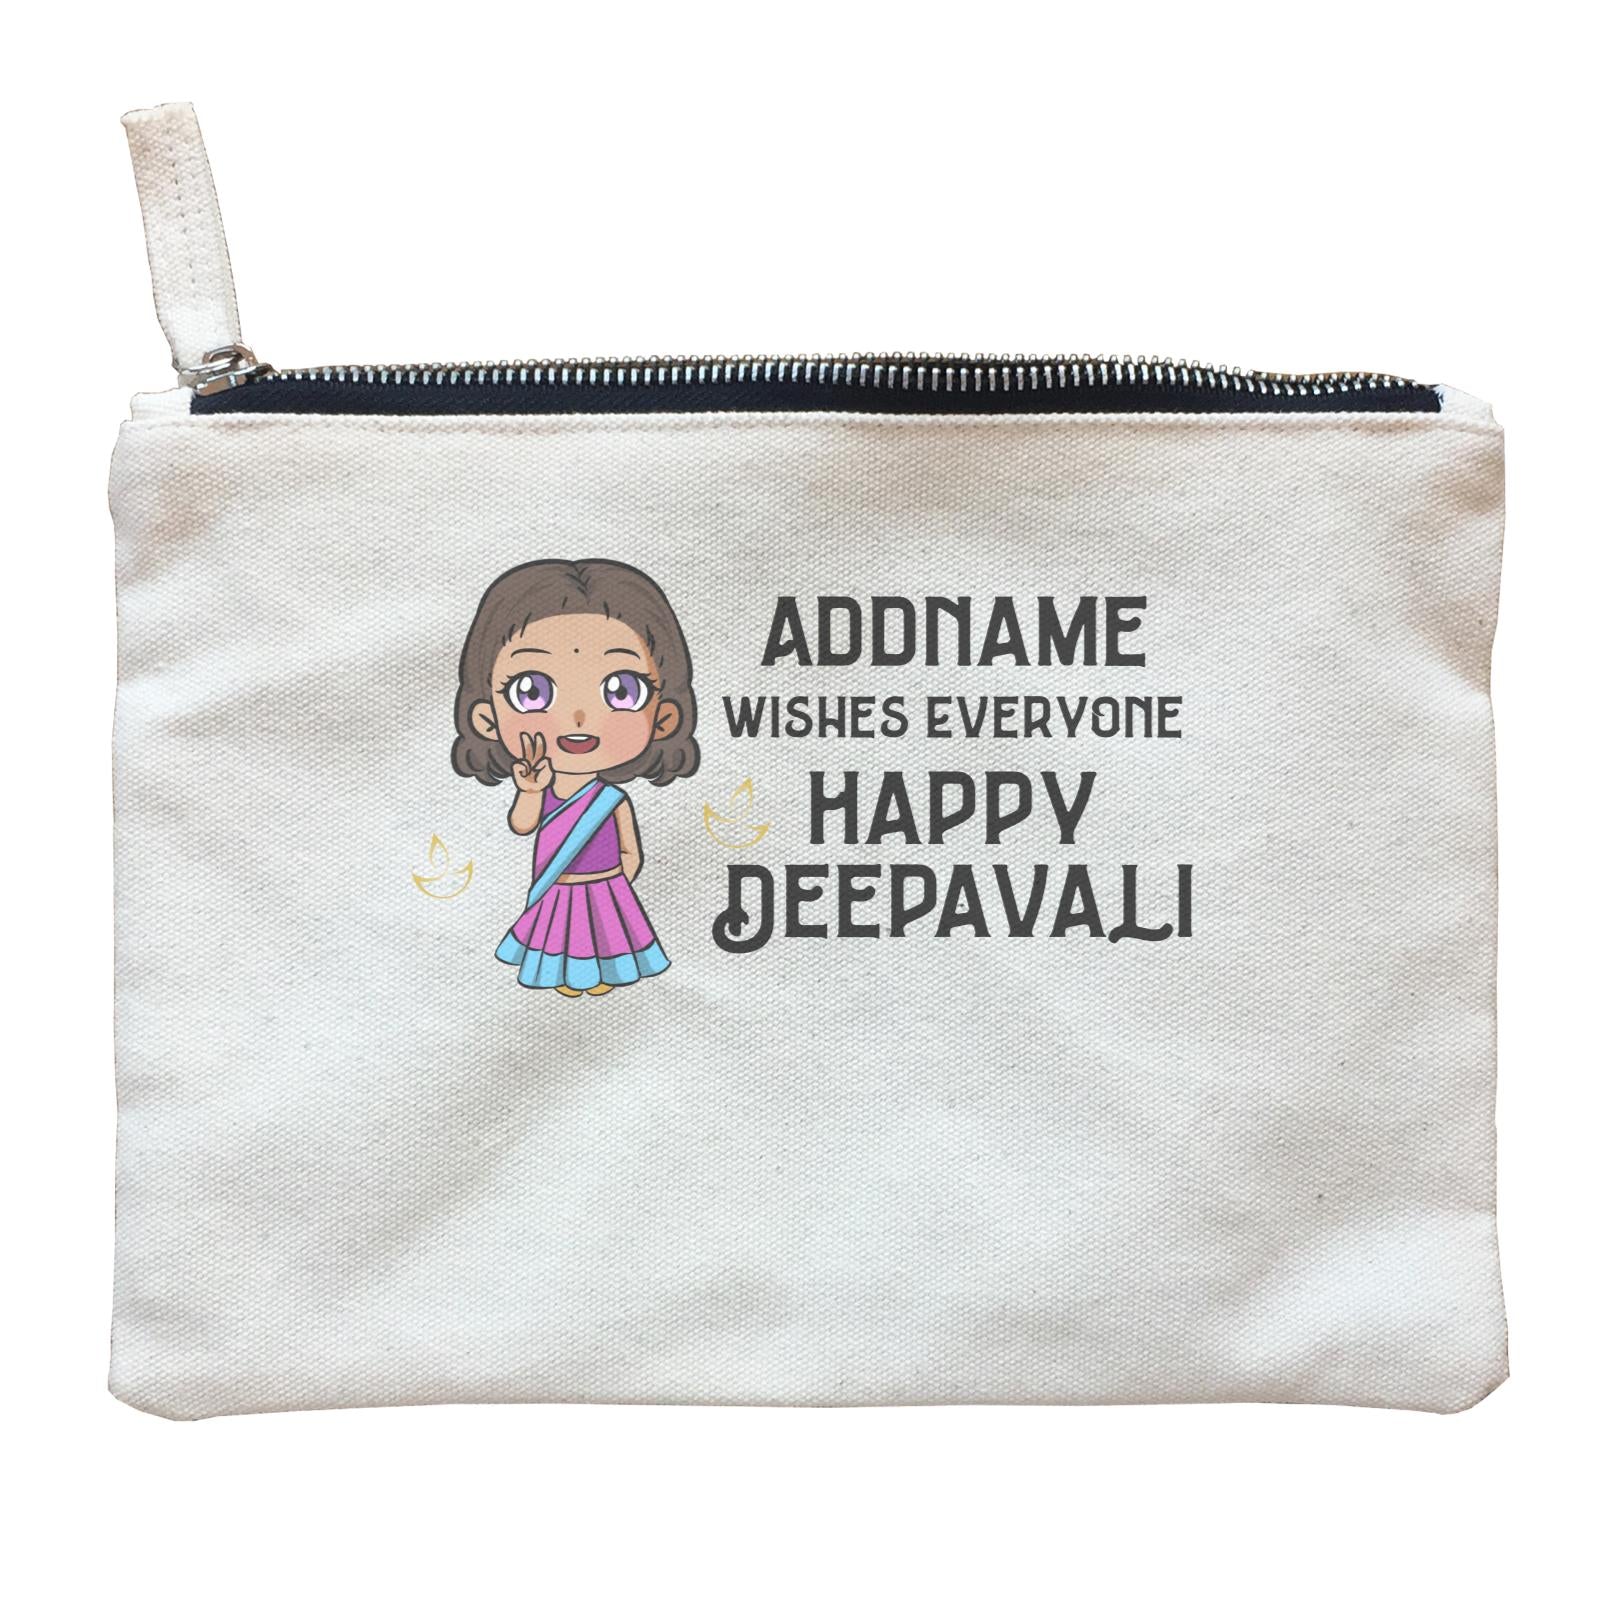 Deepavali Chibi Little Girl Front Addname Wishes Everyone Deepavali Zipper Pouch